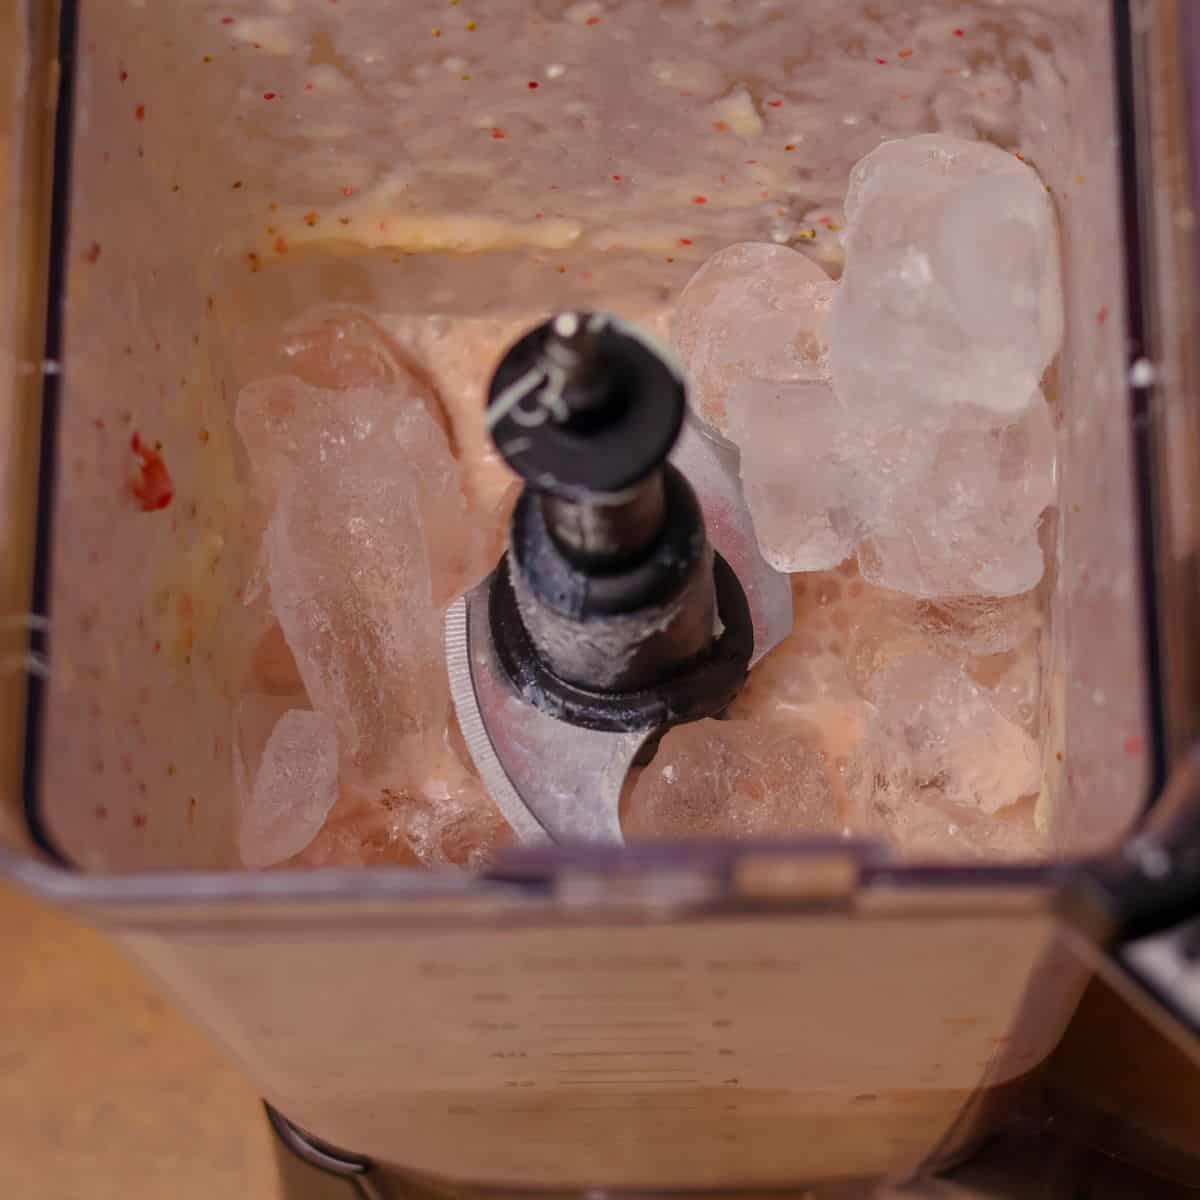 A blender filled with ice cubes on top of a partially blended mixture of pink smoothie, indicating a mid-blend pause to add ice for a frozen beverage.